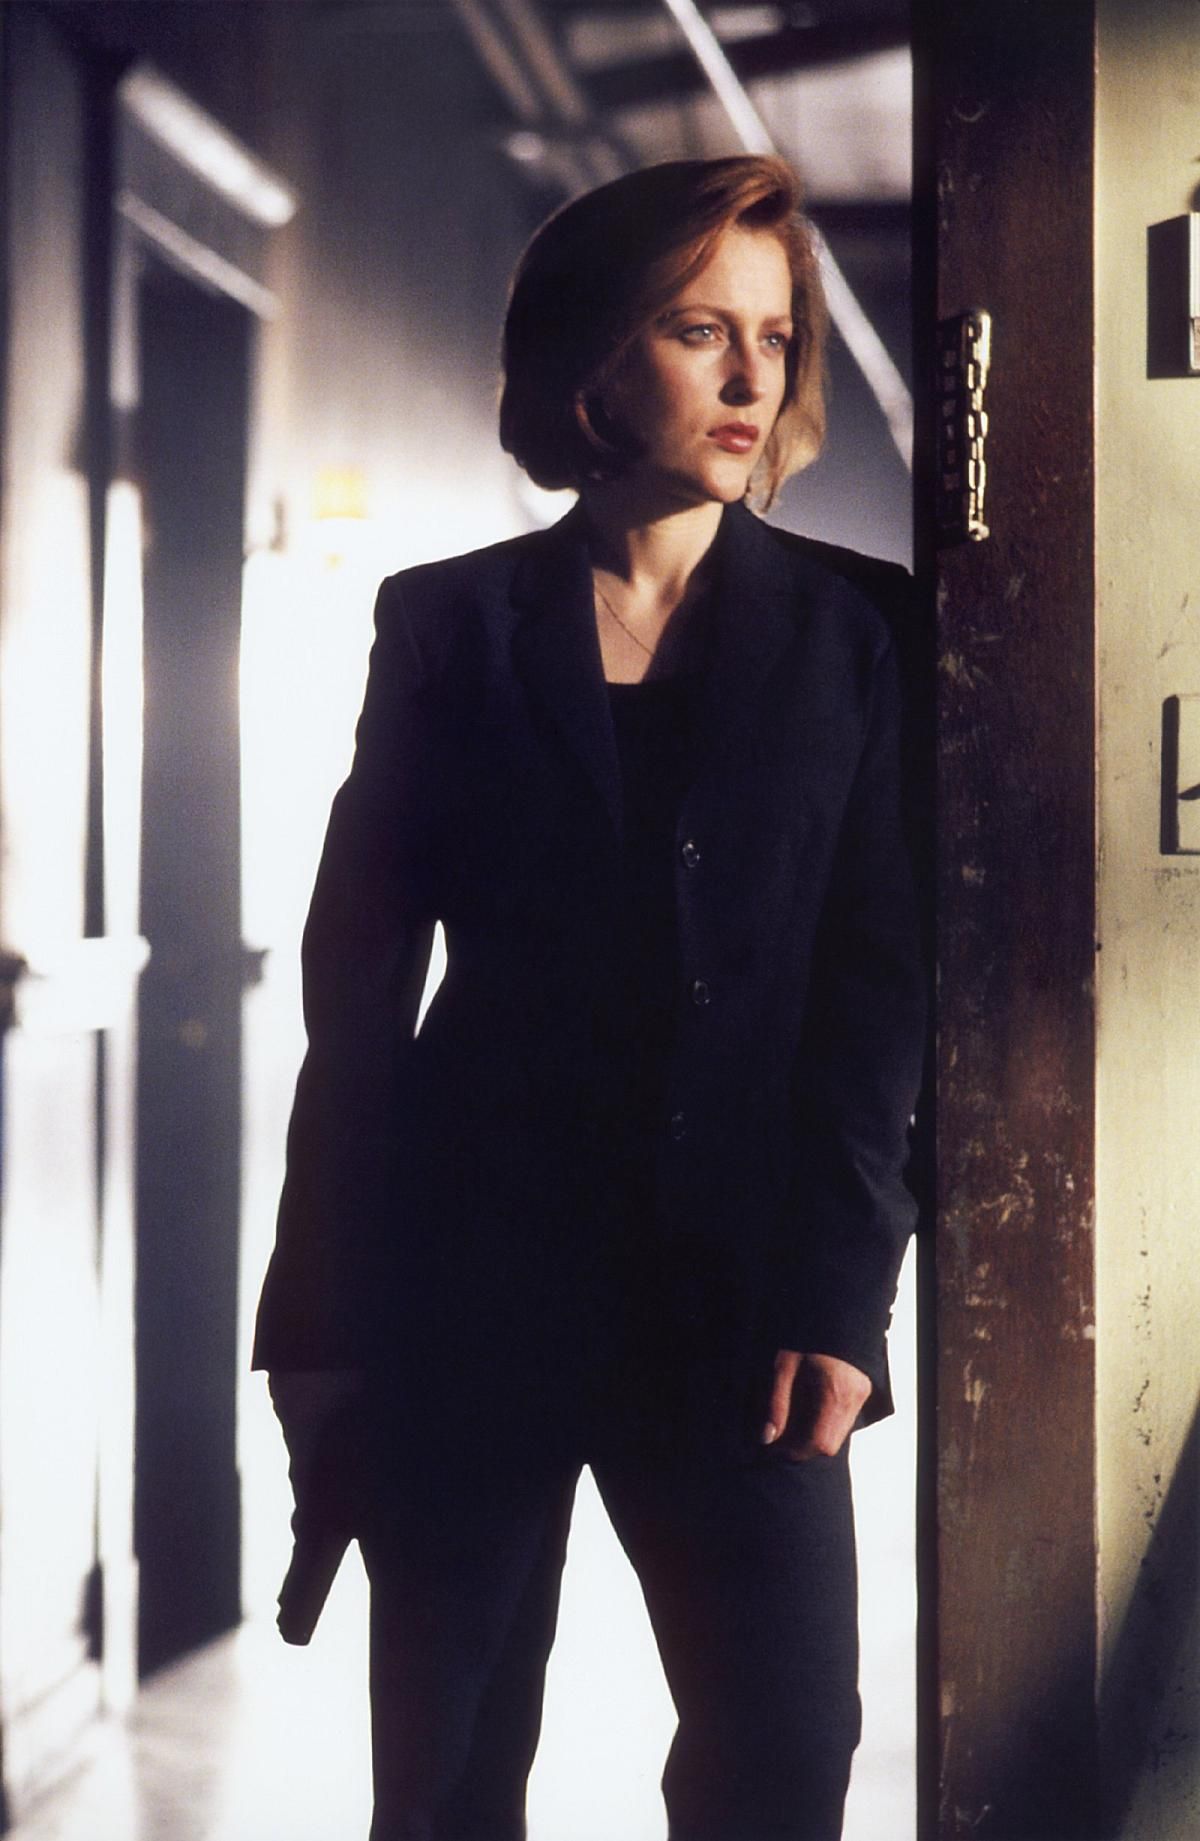 Gillian Anderson As Dana Scully On The .itl.cat